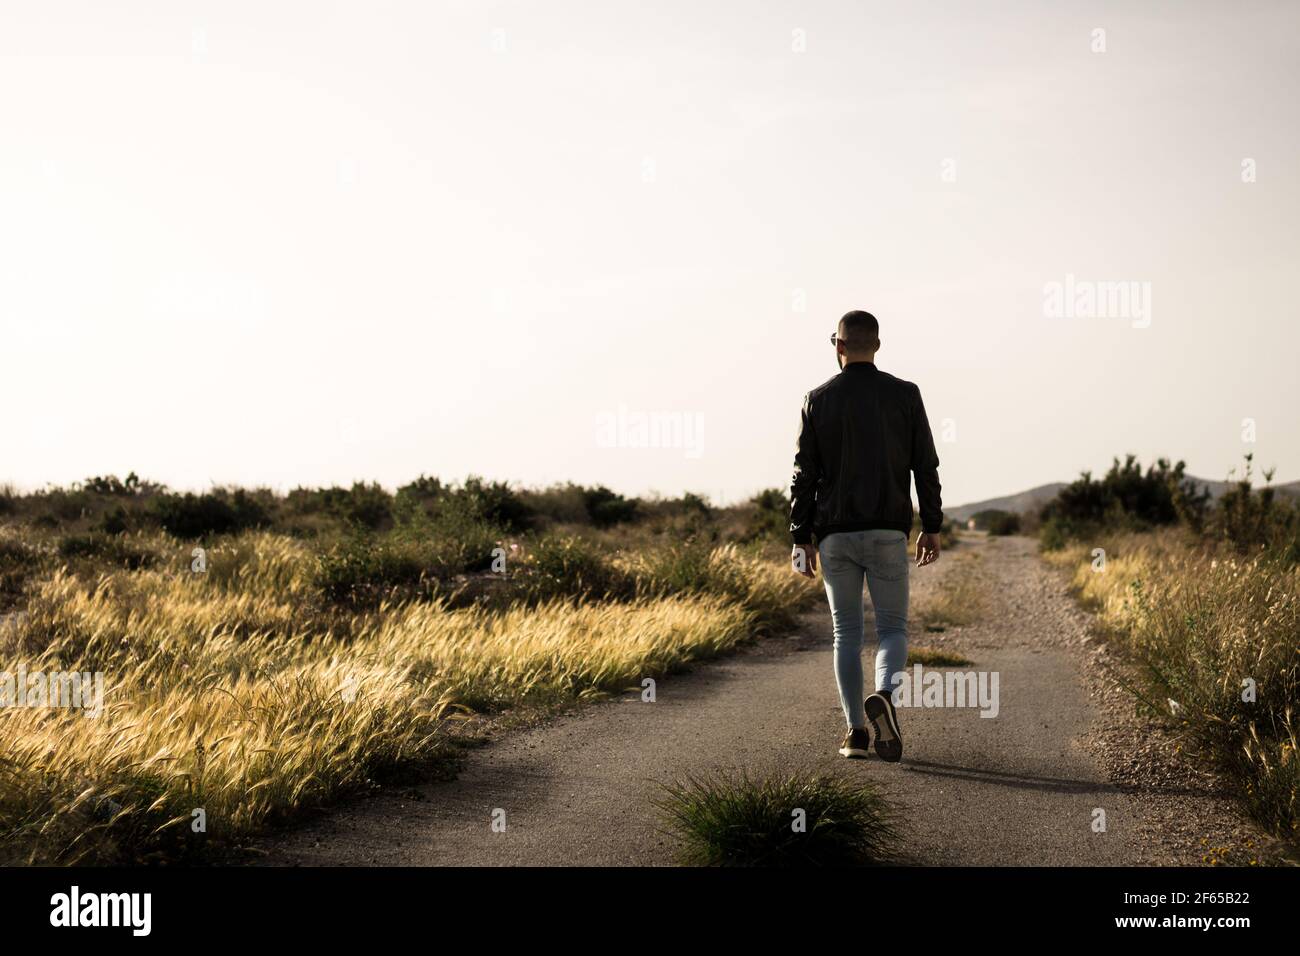 A person walking along a road at sunset. Stock Photo